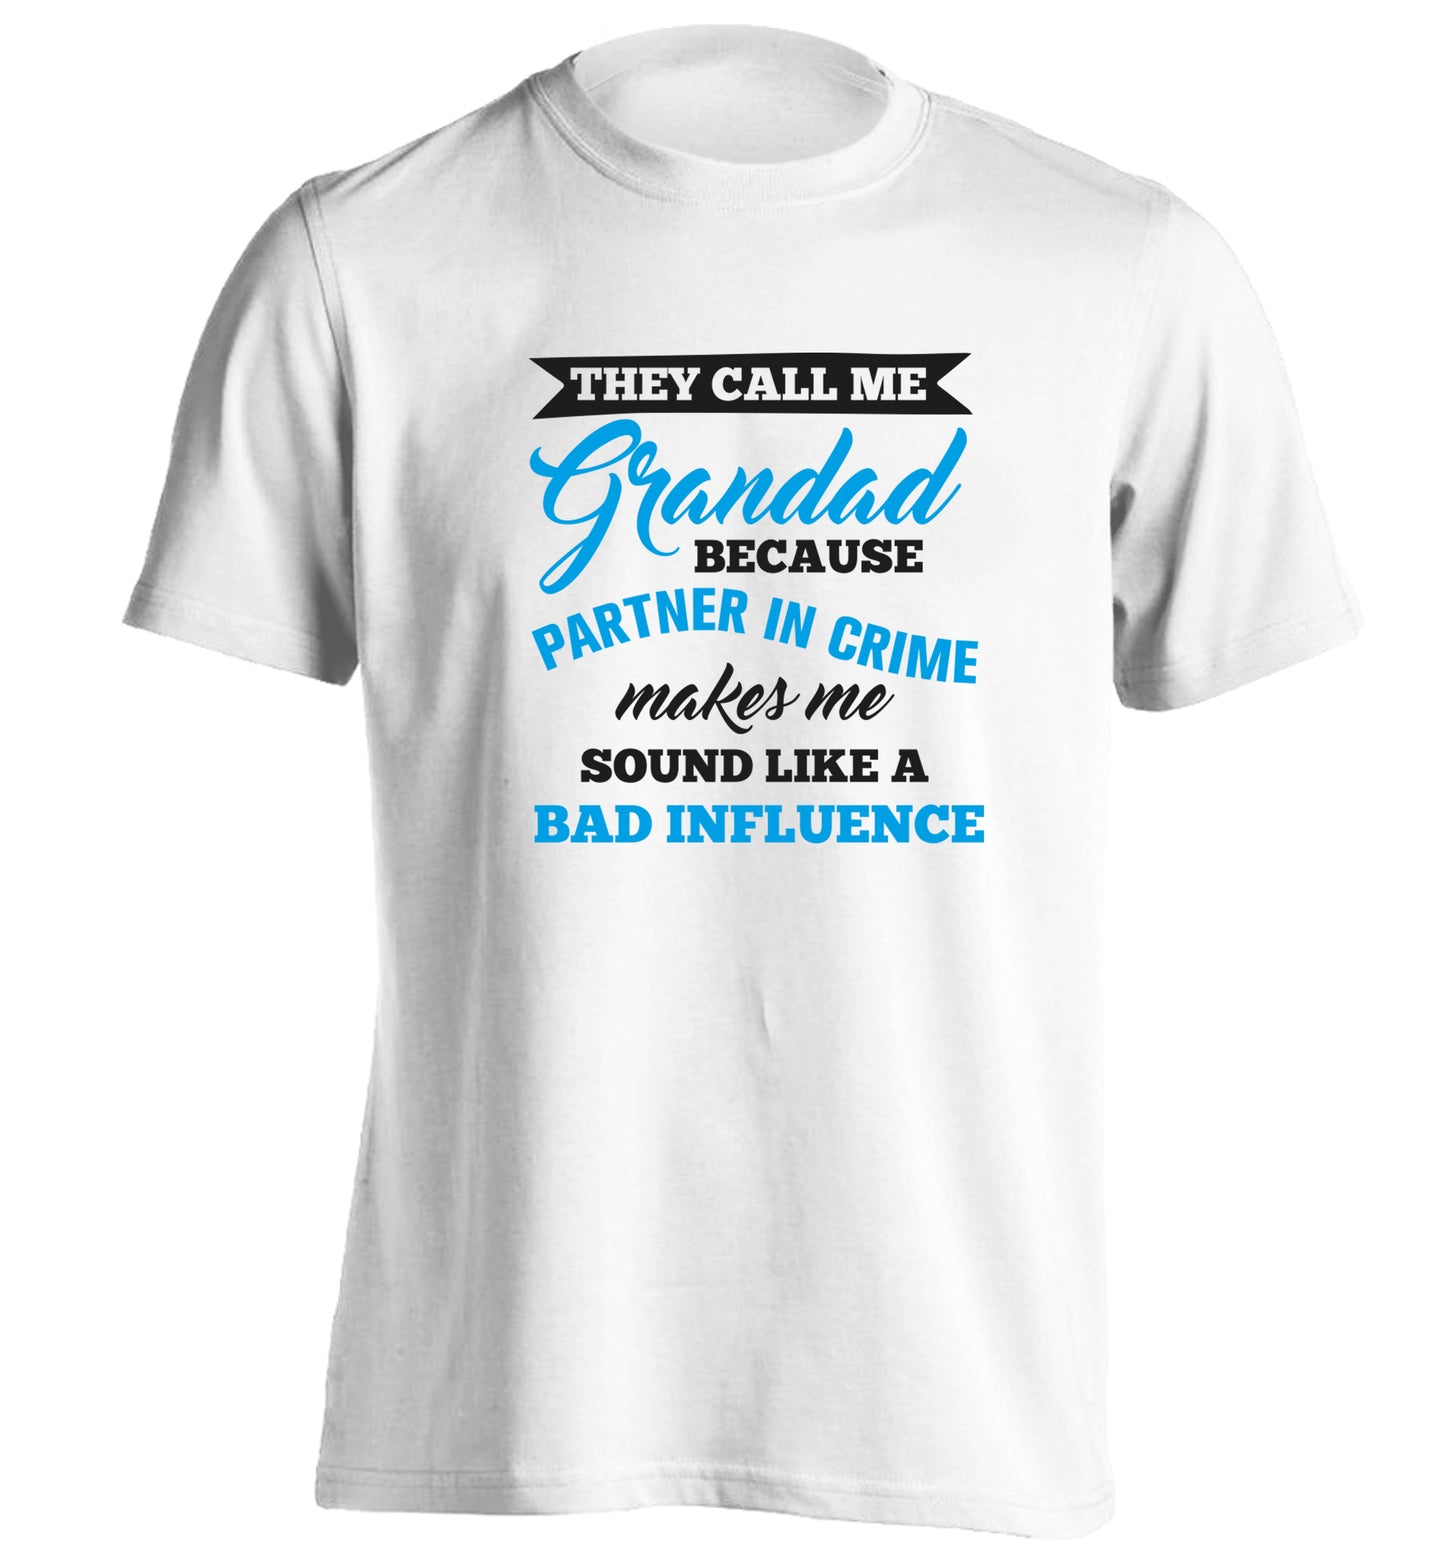 They call me Grandad because partner in crime makes me sound like a bad influence | Adult's unisex Tshirt